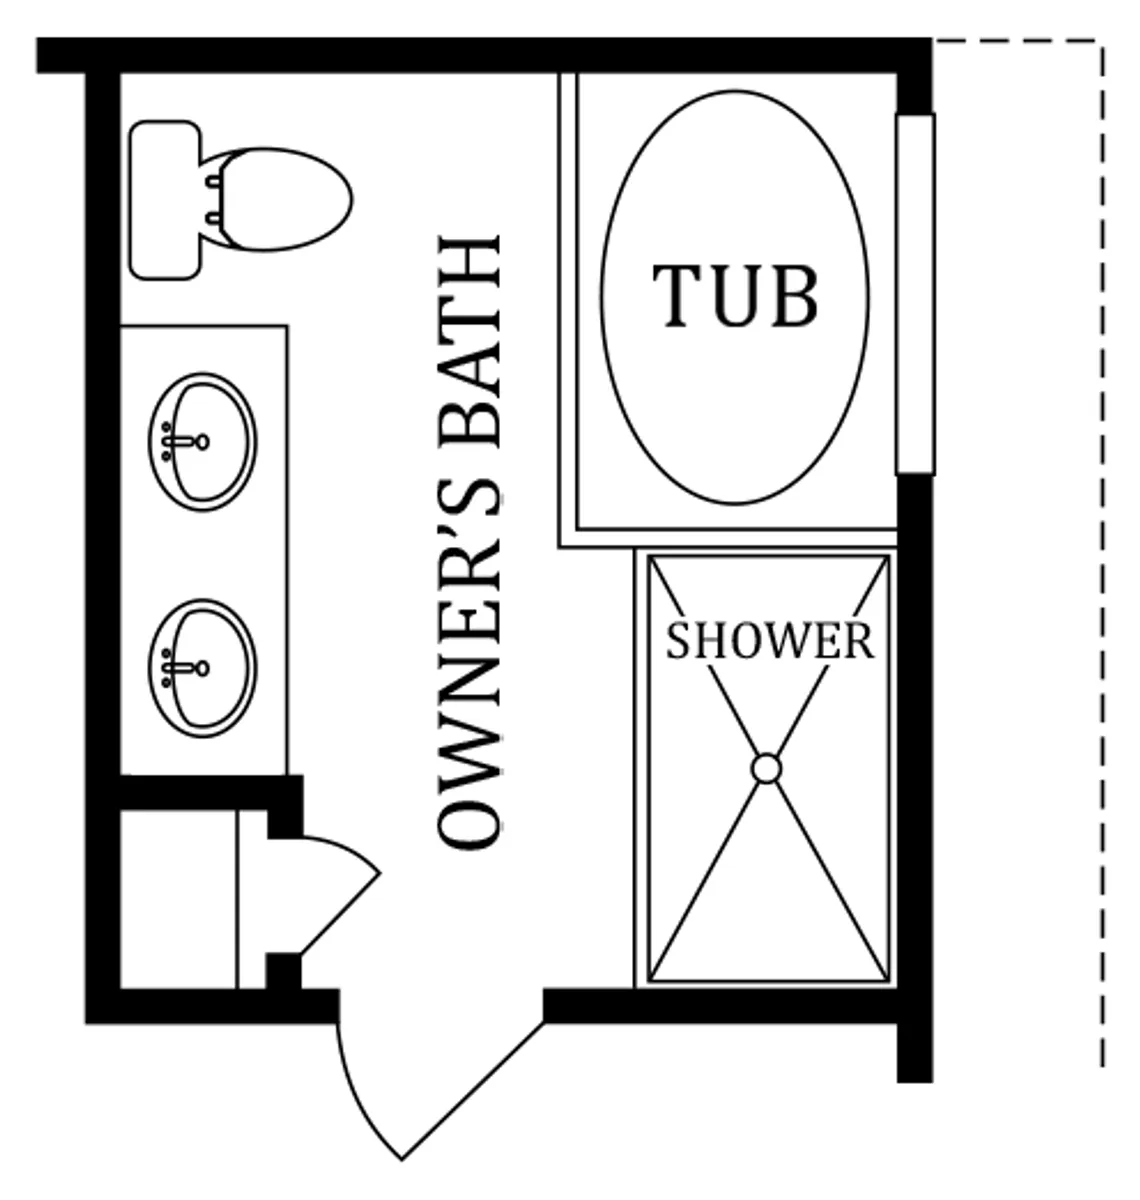 Second Floor | Opt. Super Owner's Bath - with 2' Rear Extension